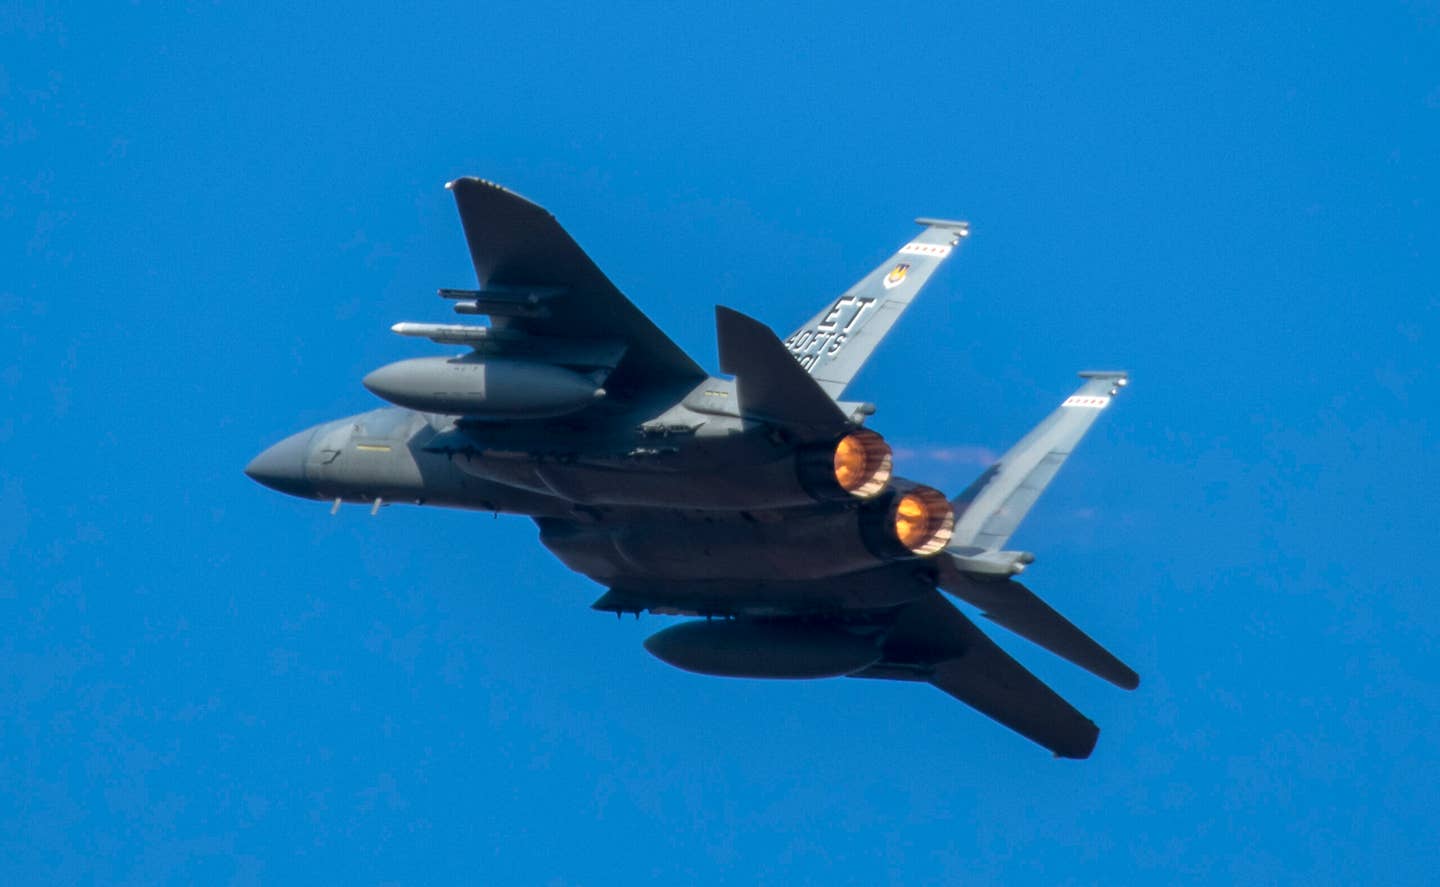 An F-15EX Eagle II zooms through the air during a flight test Oct. 31 at Eglin Air Force Base, Fla. The aircraft underwent various ground and flight acoustic testing to create a baseline noise level for use by the Department of Defense. This was the first time this type of in-depth digital acoustic sound testing was done on any F-15 model. (U.S. Air Force photo/Samuel King Jr.)